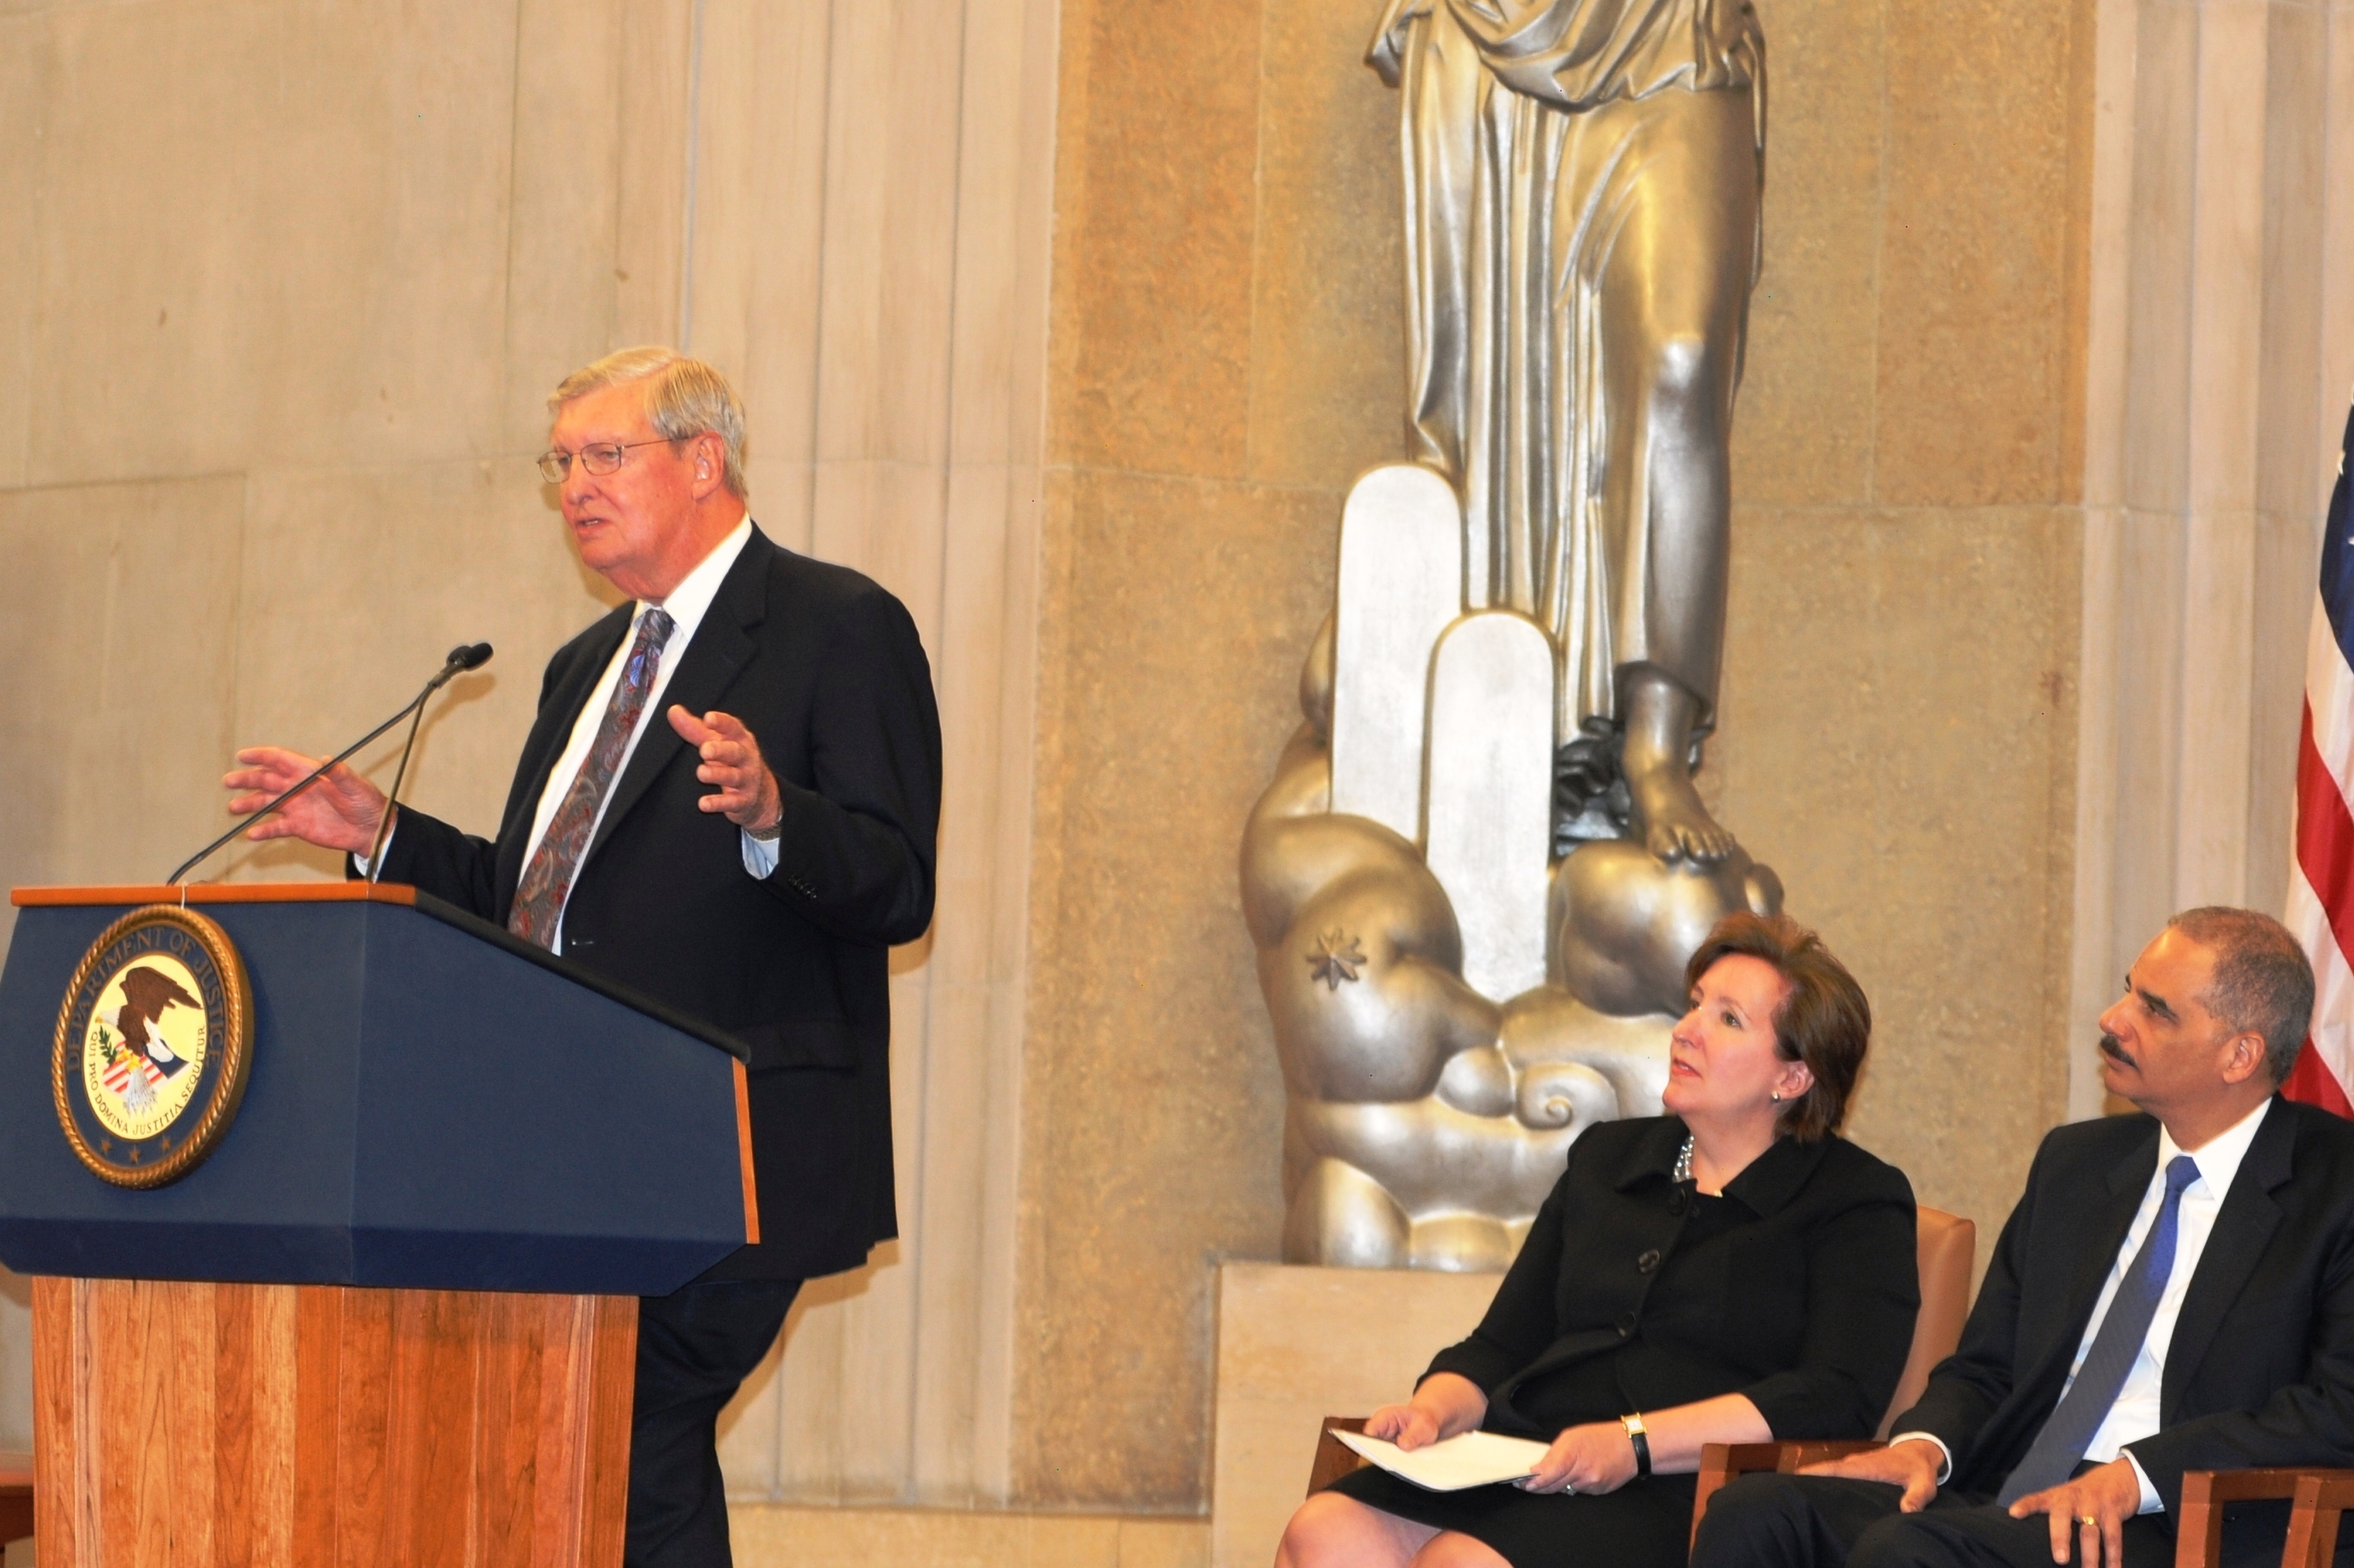 2012 Sherman Award recipient James F. Rill gives remarks after receiving the award from Attorney General Eric Holder.